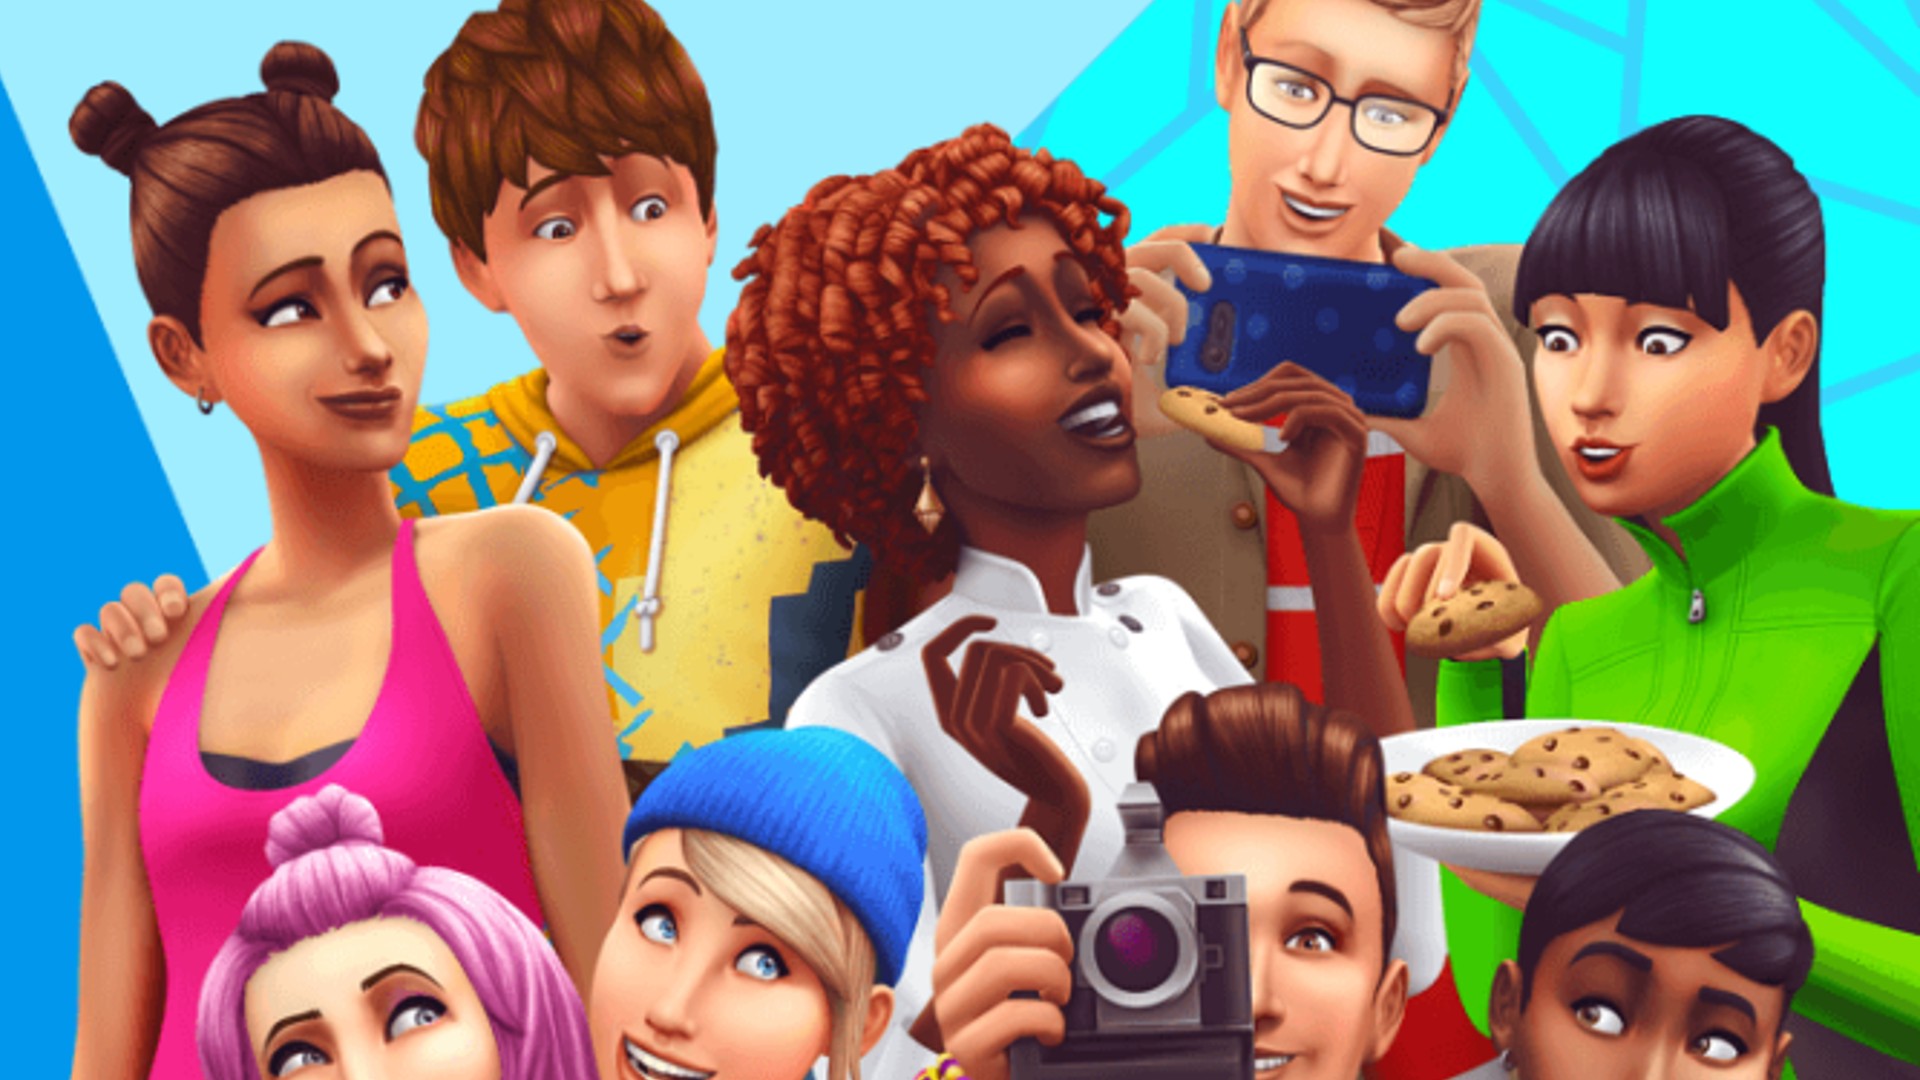 10 years in, EA forms new The Sims 4 team dedicated to fixing